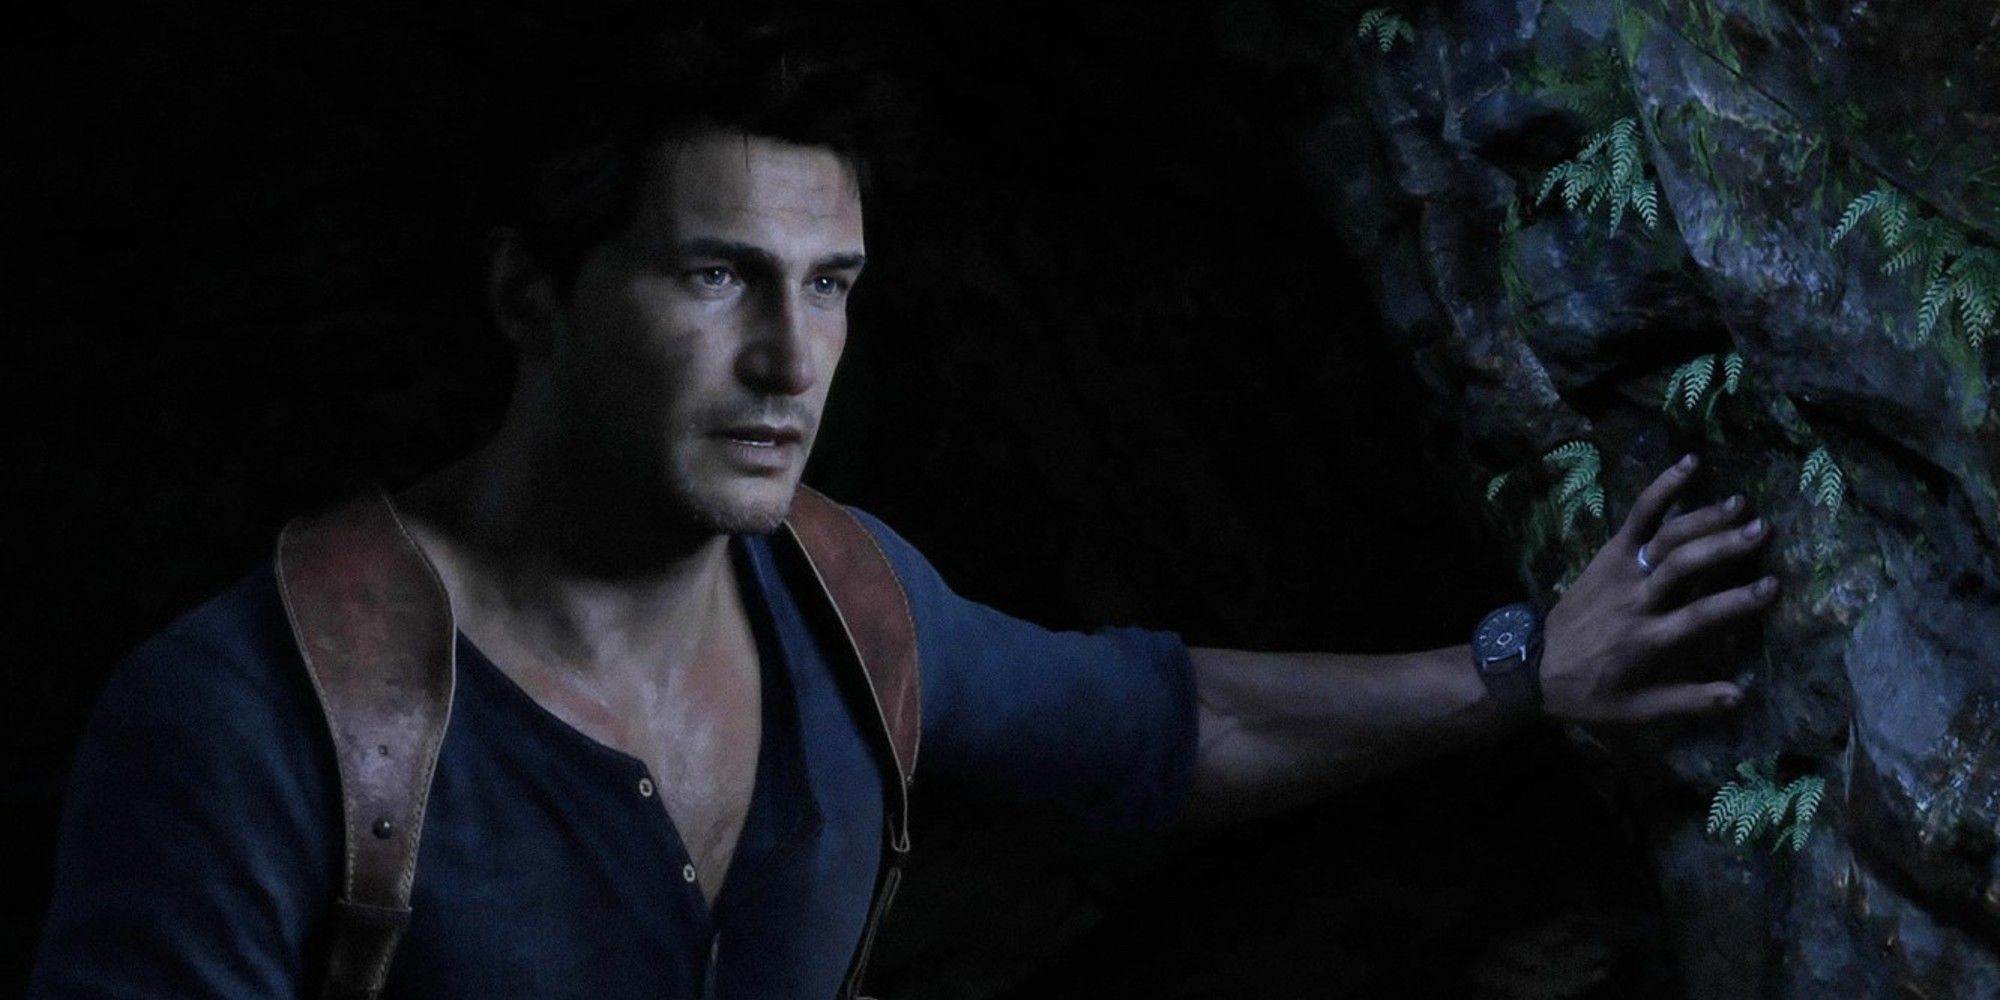 Nathan Drake from Uncharted 4, leaning on a rock and looking worried